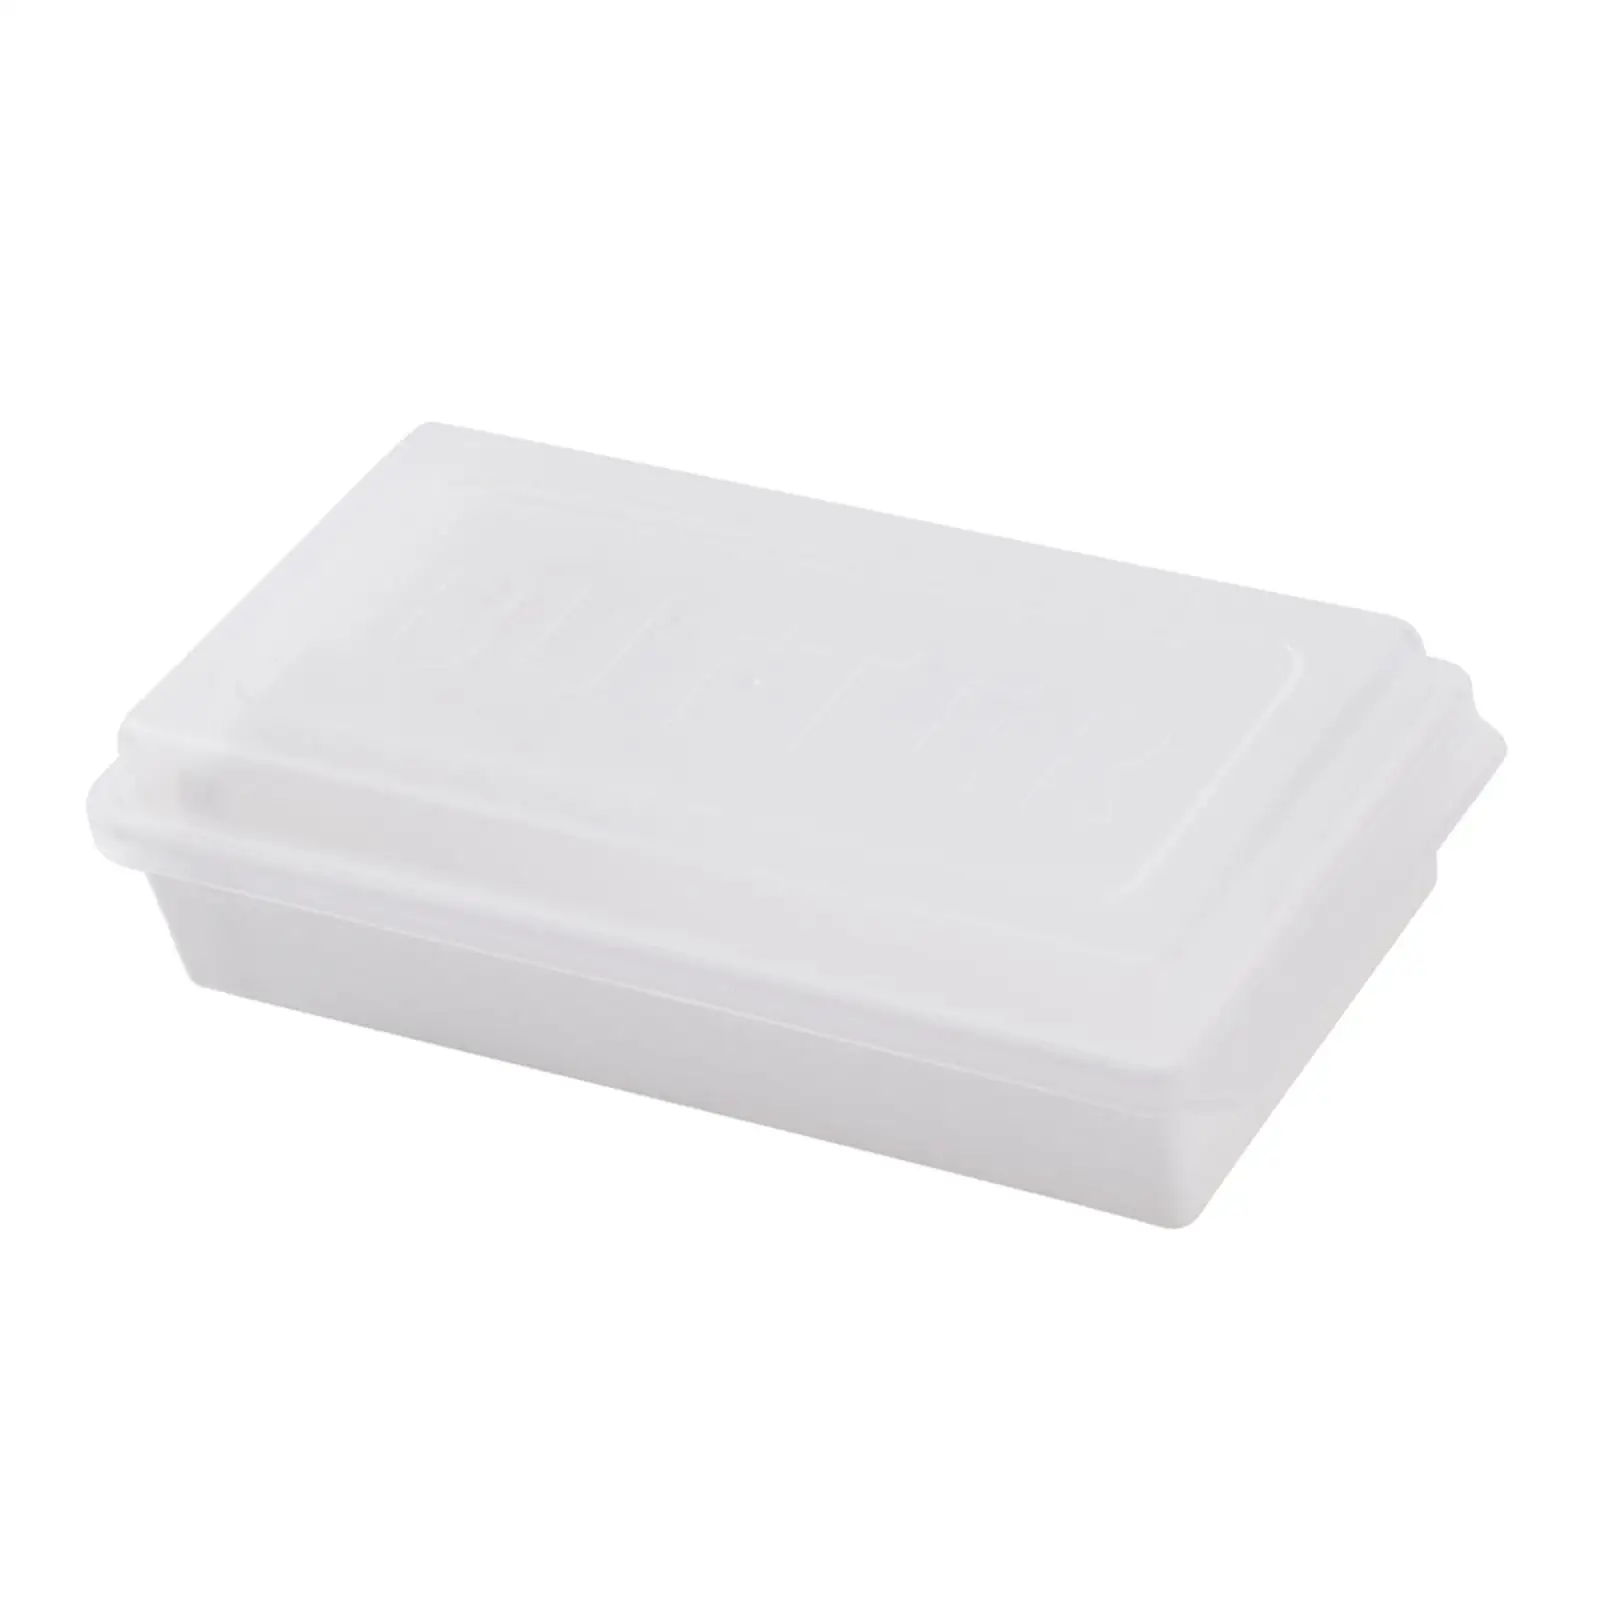 Butter with Lid Butter Cutting Storage Box for Fridge Dining